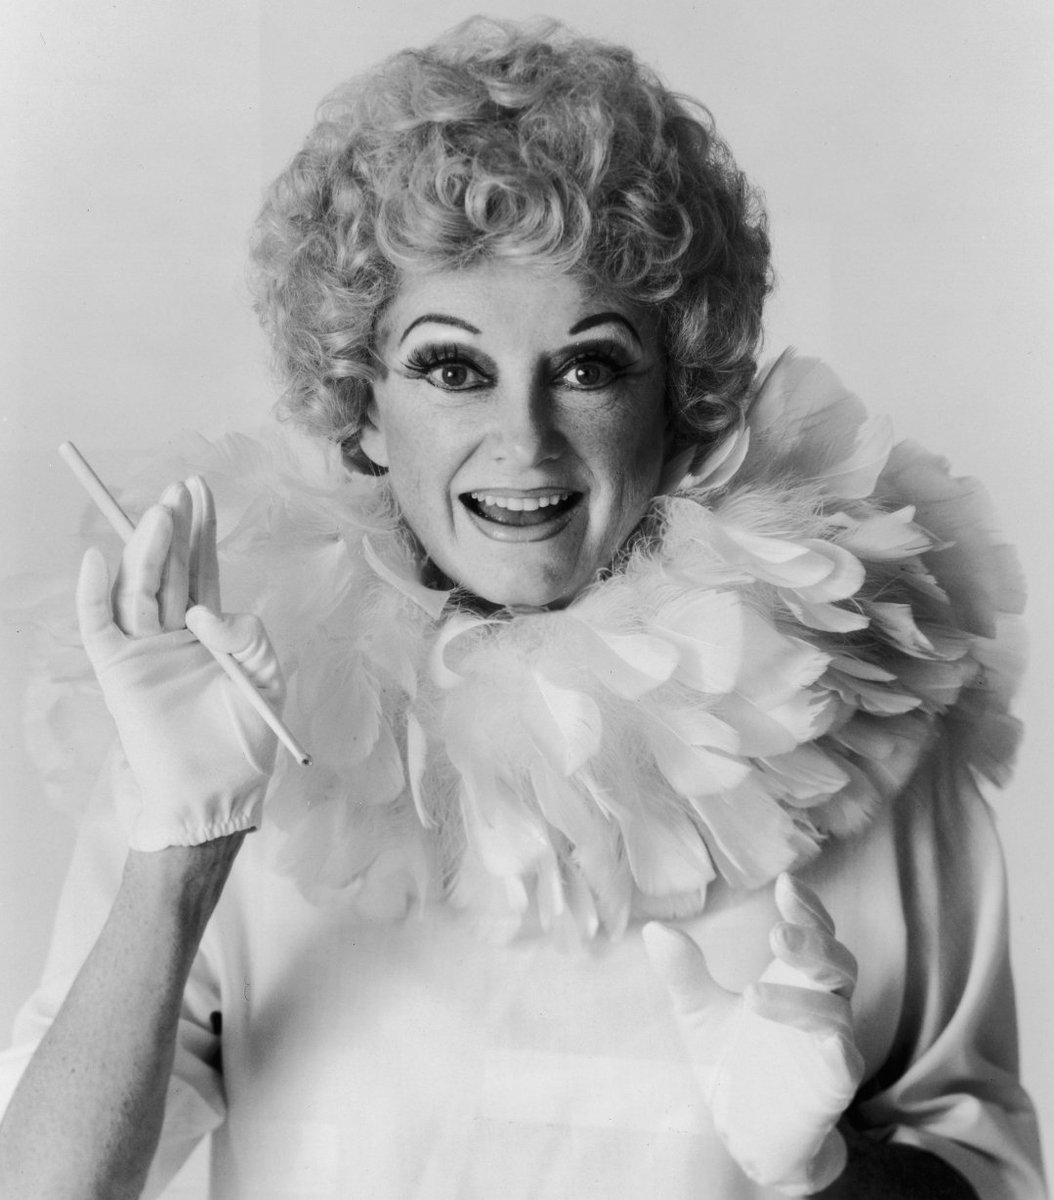 Phyllis Diller, one of the first female stand up comics to become a household name in the U.S., was a comedian, actress, author, musician and visual artist - she would also go on to inspire drag queens for generations.